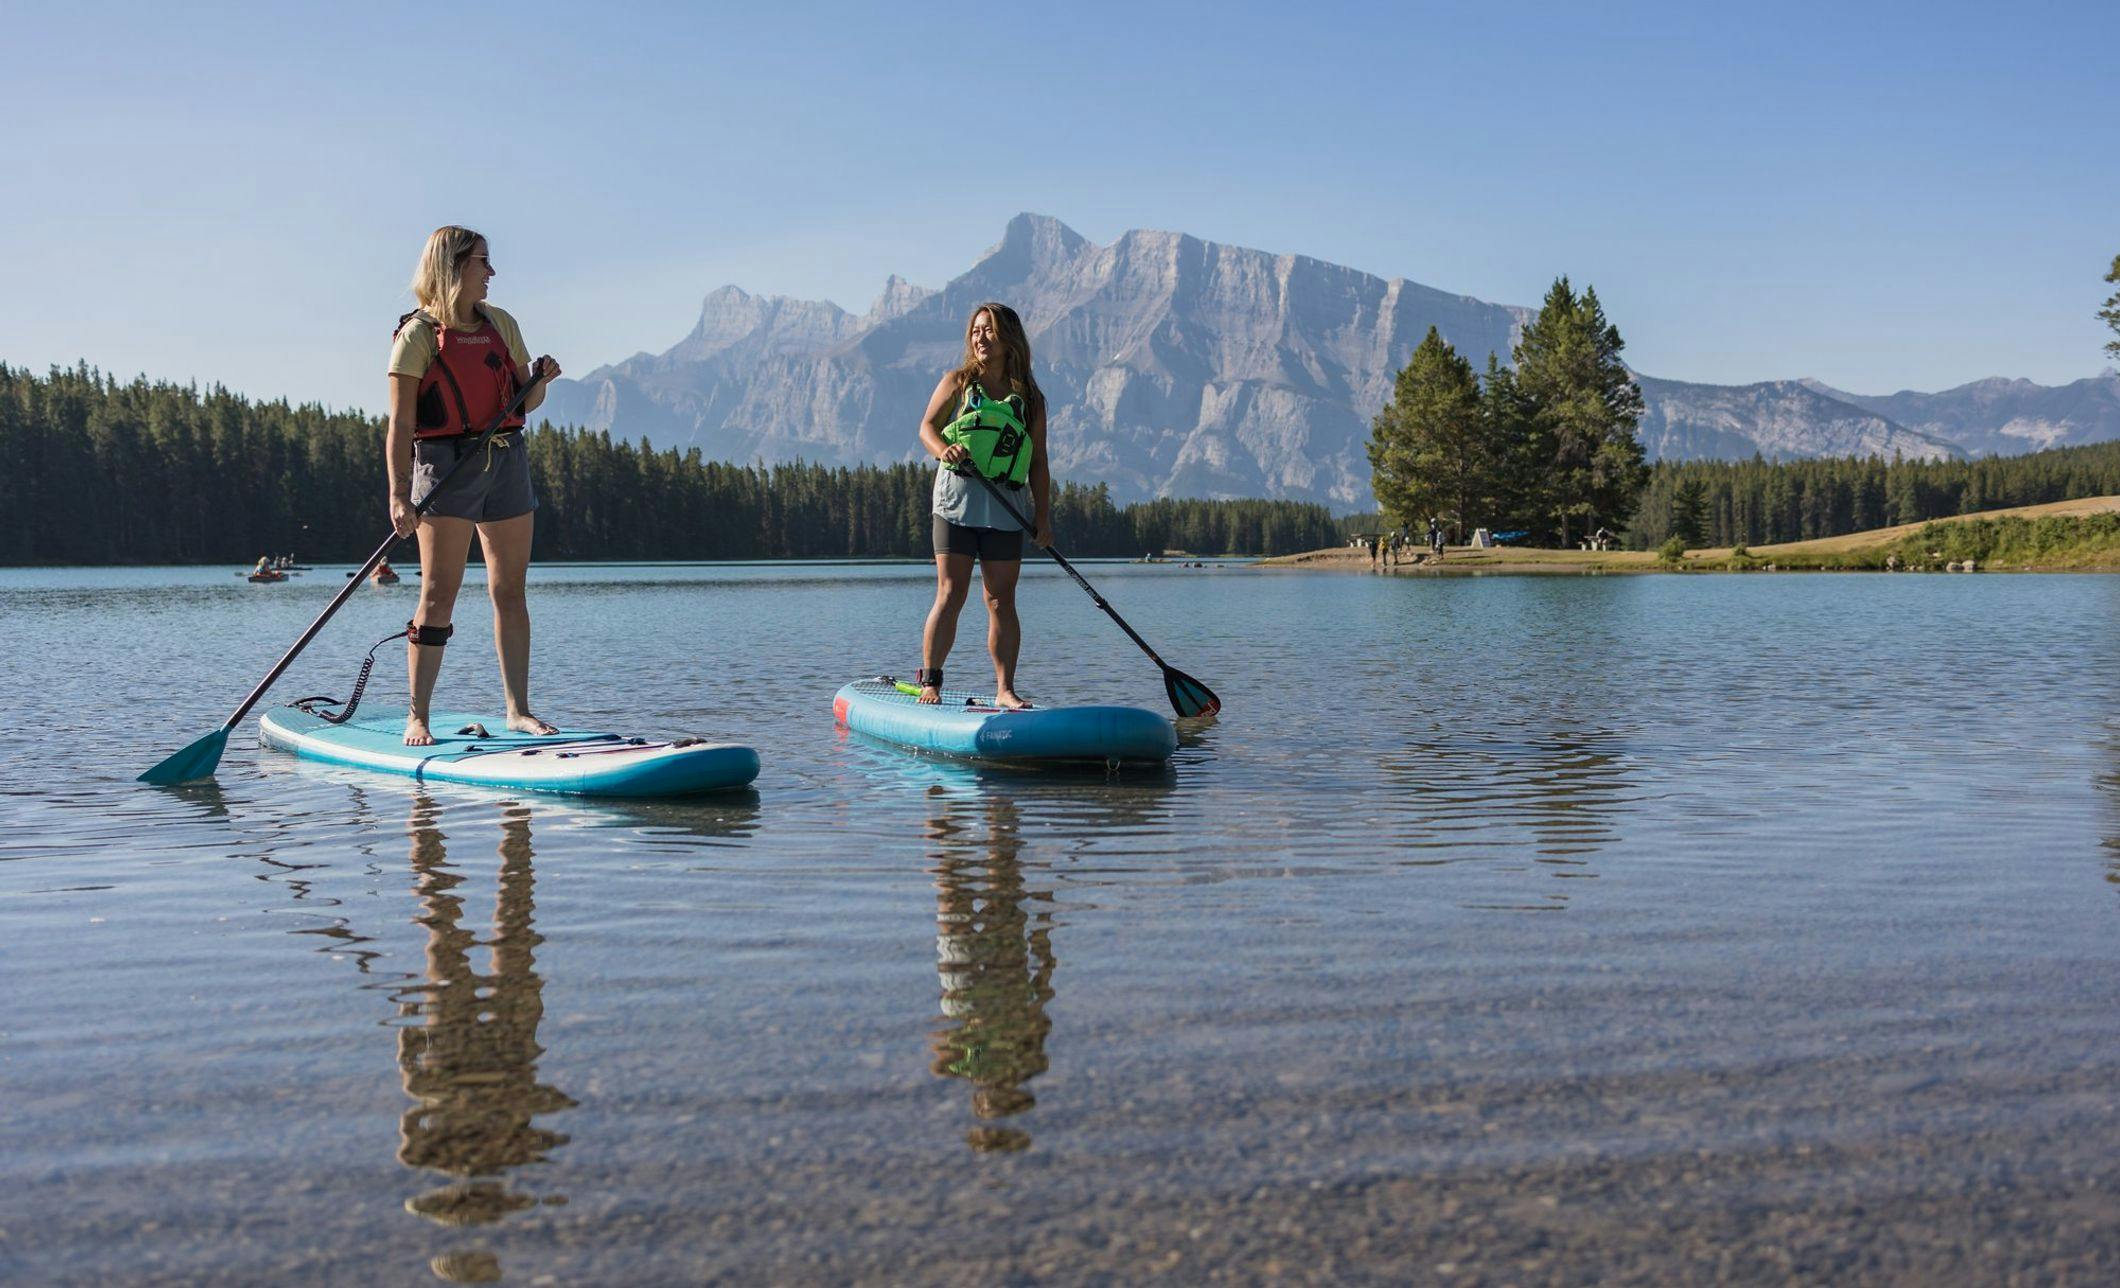 Two female paddleboarders balance on their boards on a clear blue lake with people enjoying the lake front behind them